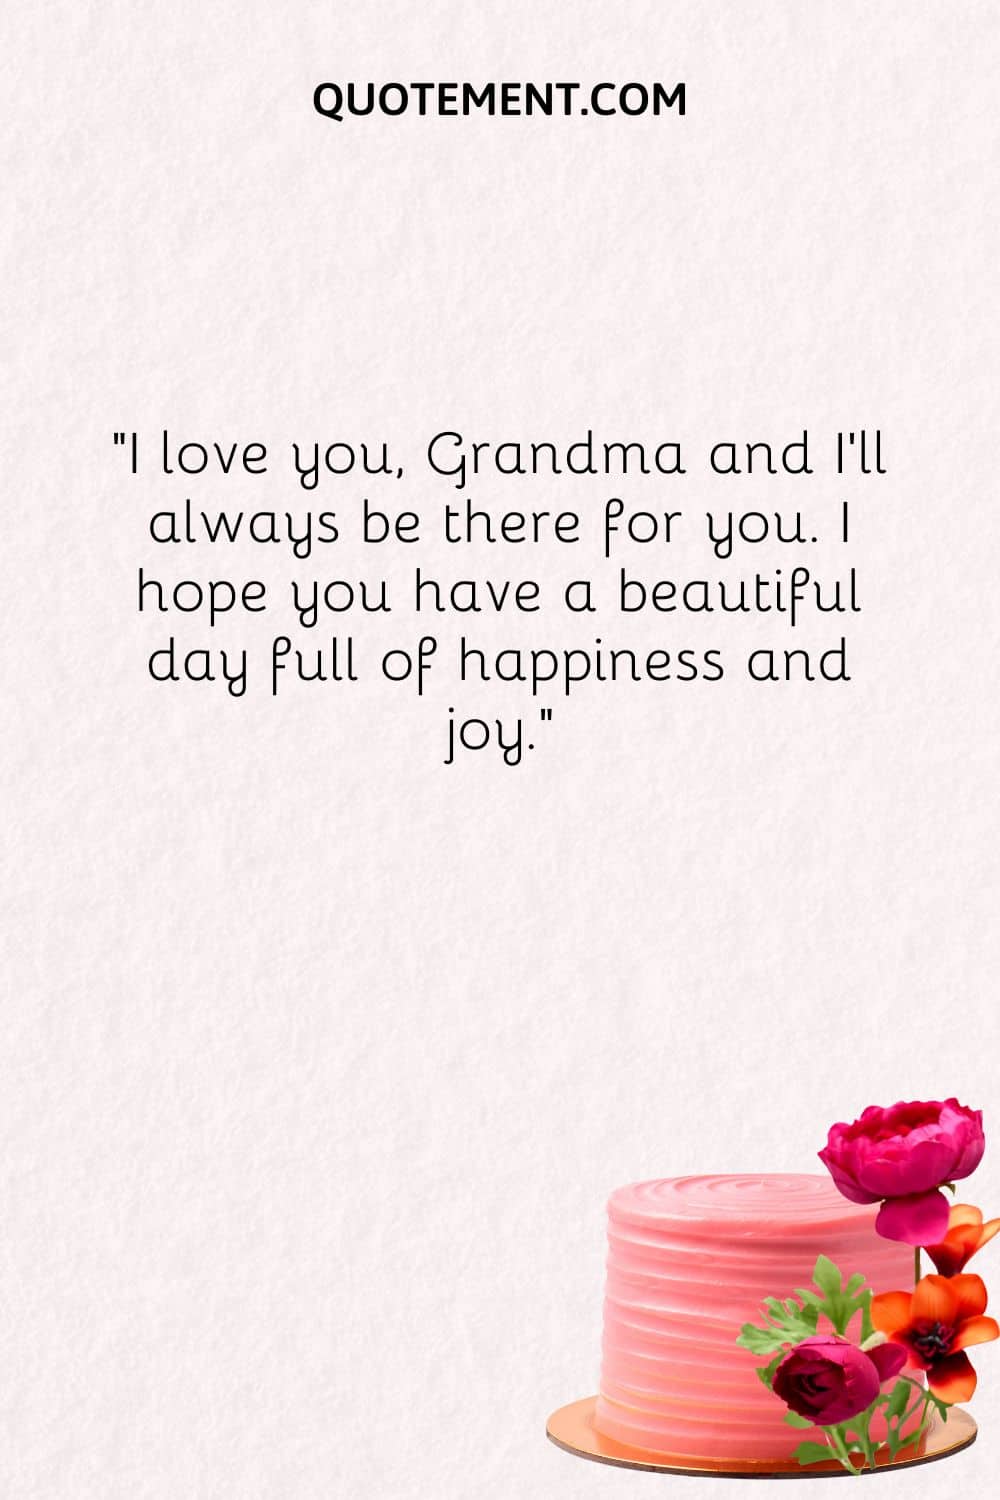 I love you, Grandma and I'll always be there for you. I hope you have a beautiful day full of happiness and joy